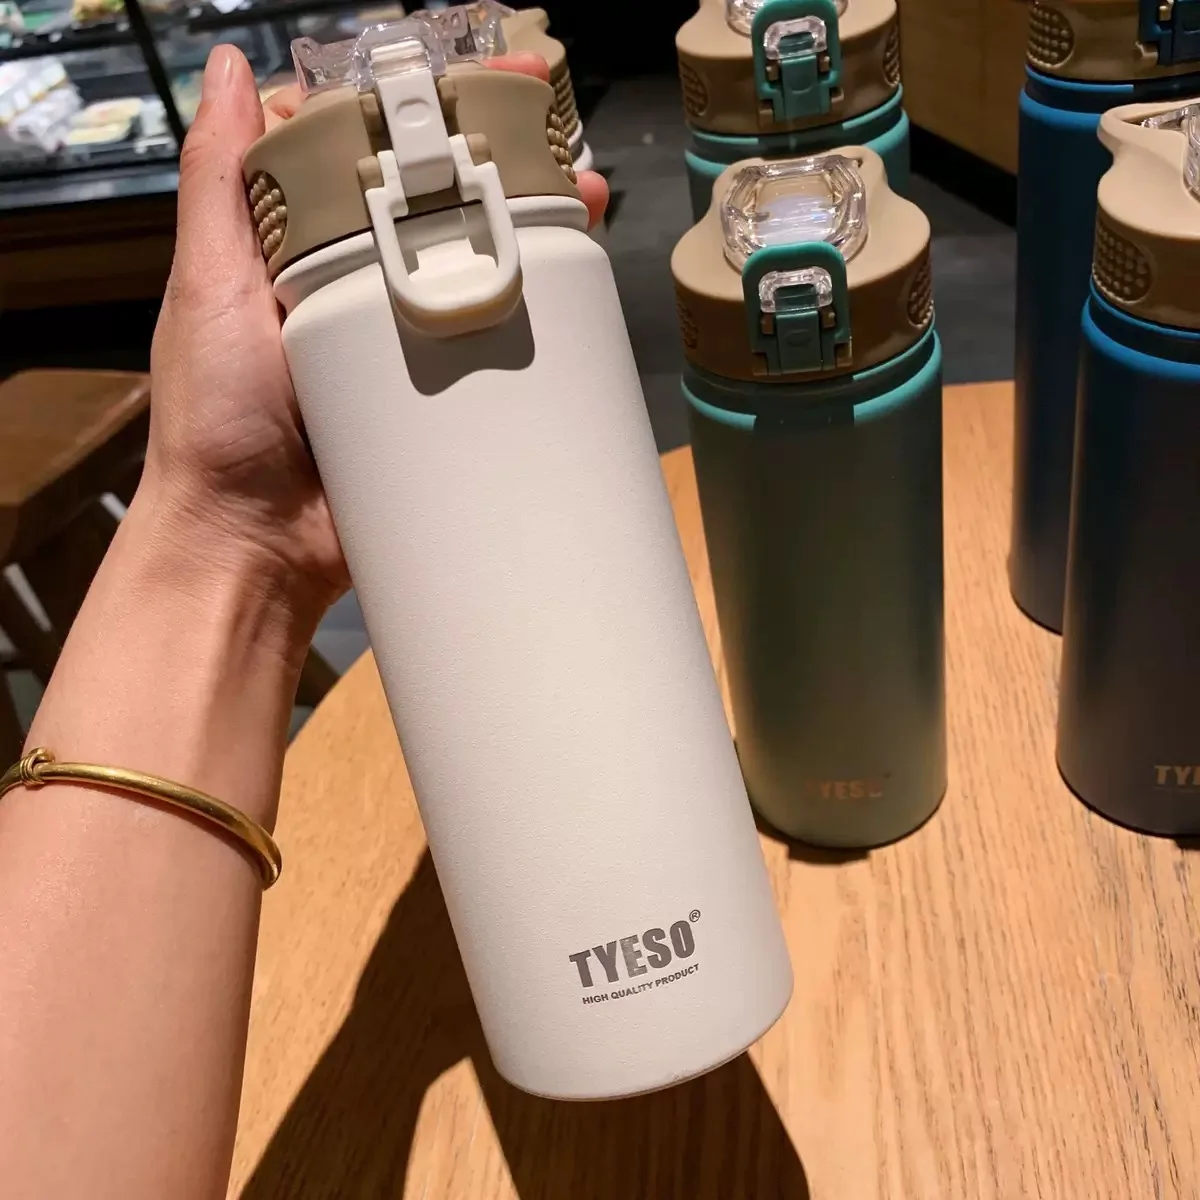 https://ae01.alicdn.com/kf/S1c1d52c42c9d463baac0e3ef917d708bt/Stainless-Steel-Thermos-Bottle-with-Straw-Thermal-Cup-Car-Insulated-Flask-Water-Tumbler-for-Outdoor-Sports.jpg